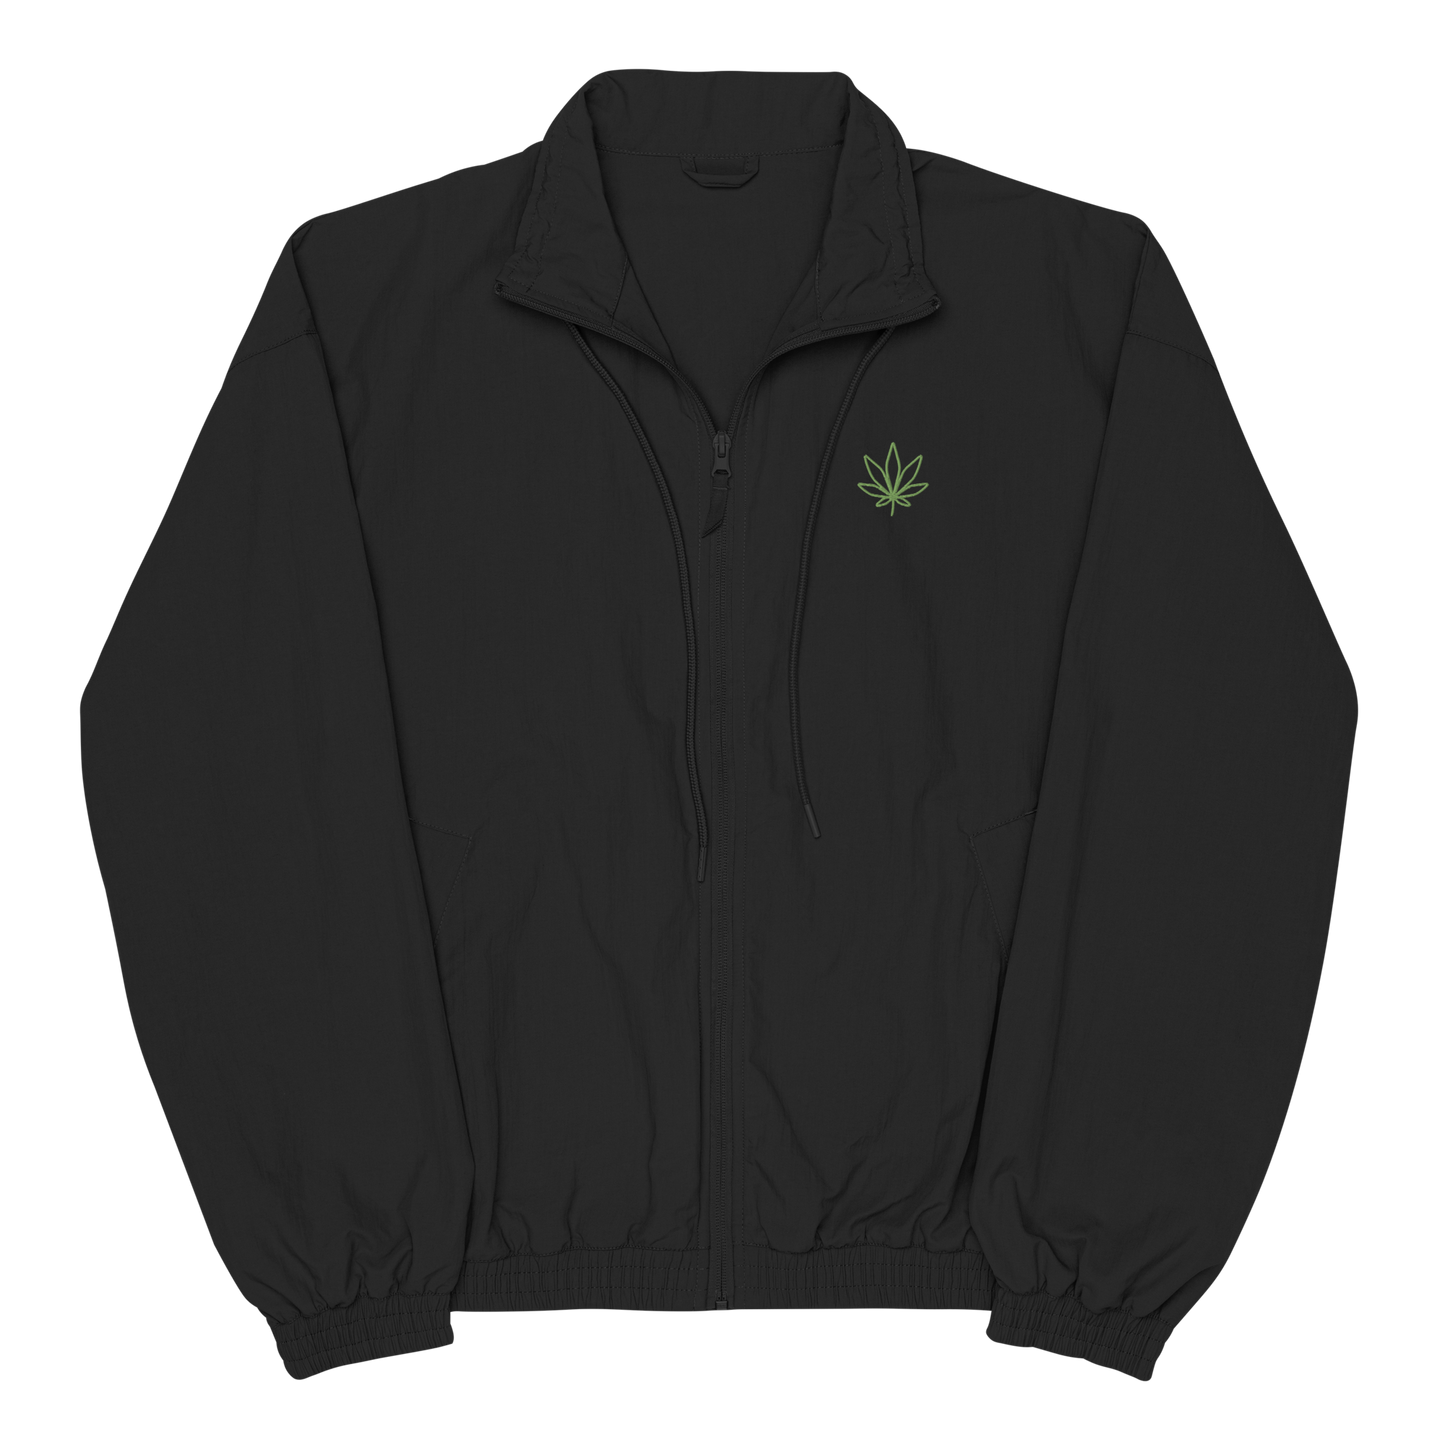 The Cannabusinessmen/women tracksuit top - Embroidered cannabis leaf